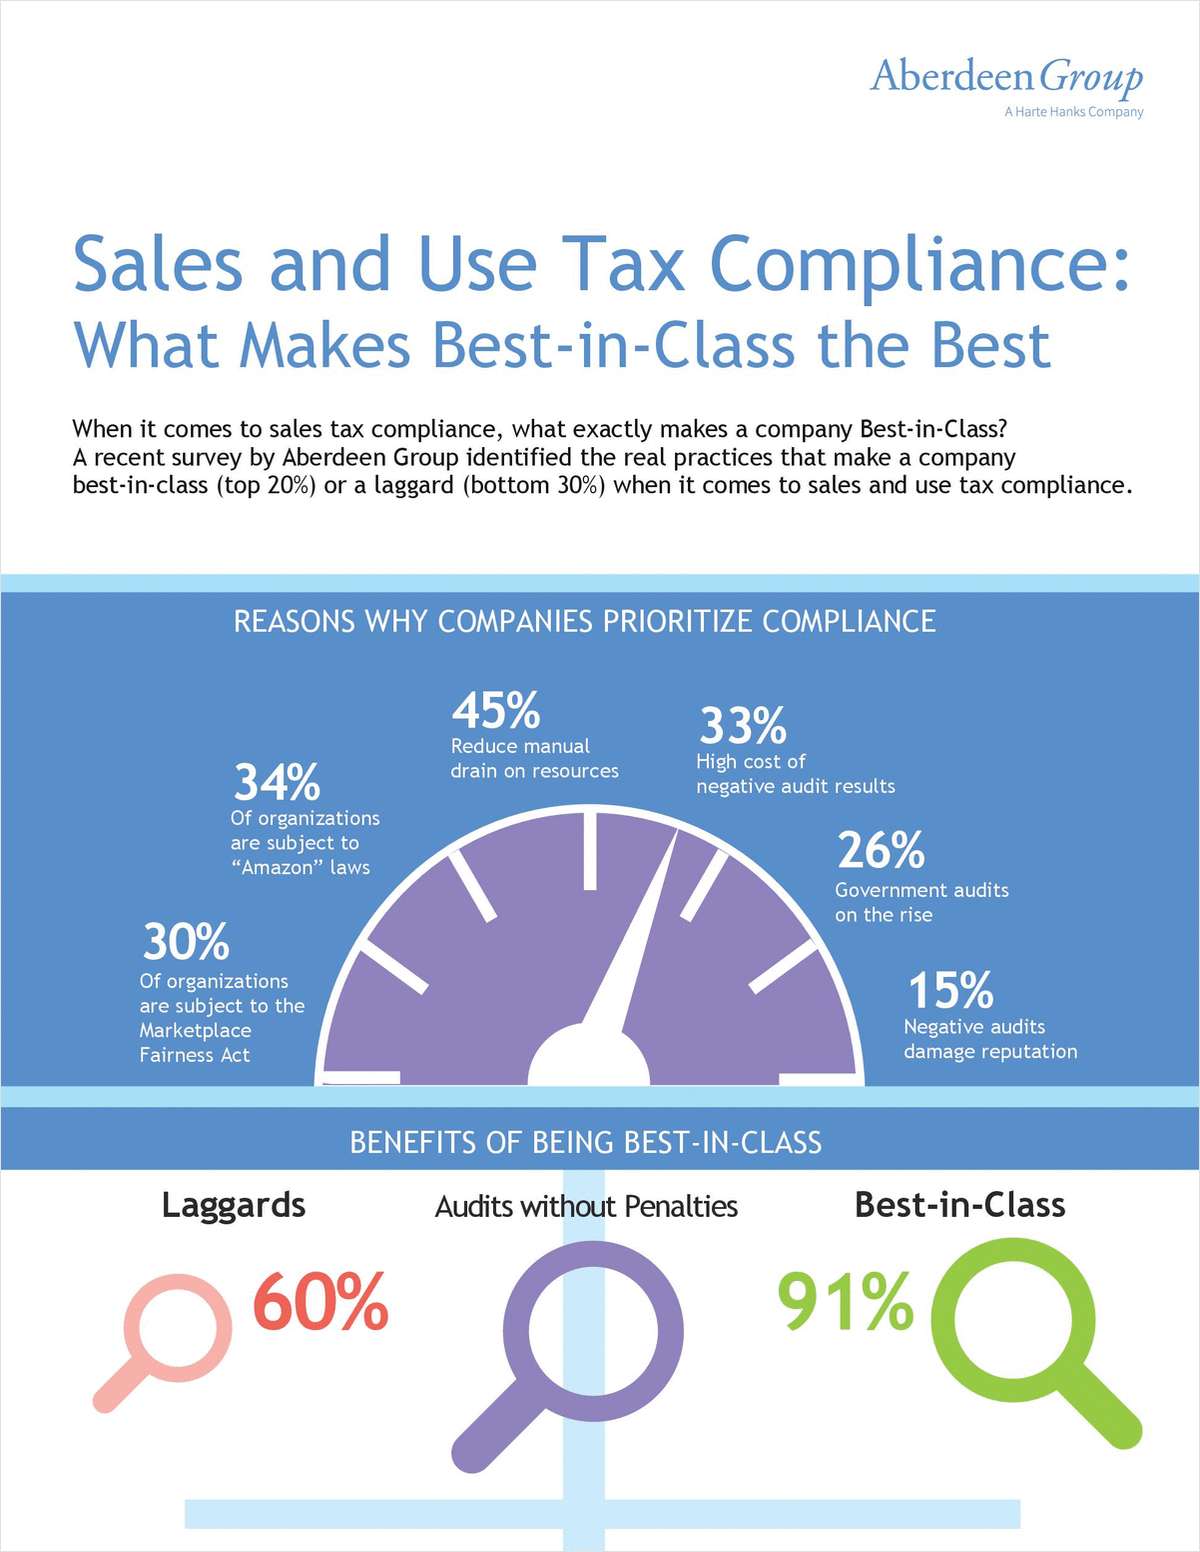 Sales and Use Tax Compliance: What Makes Best-in-Class the Best